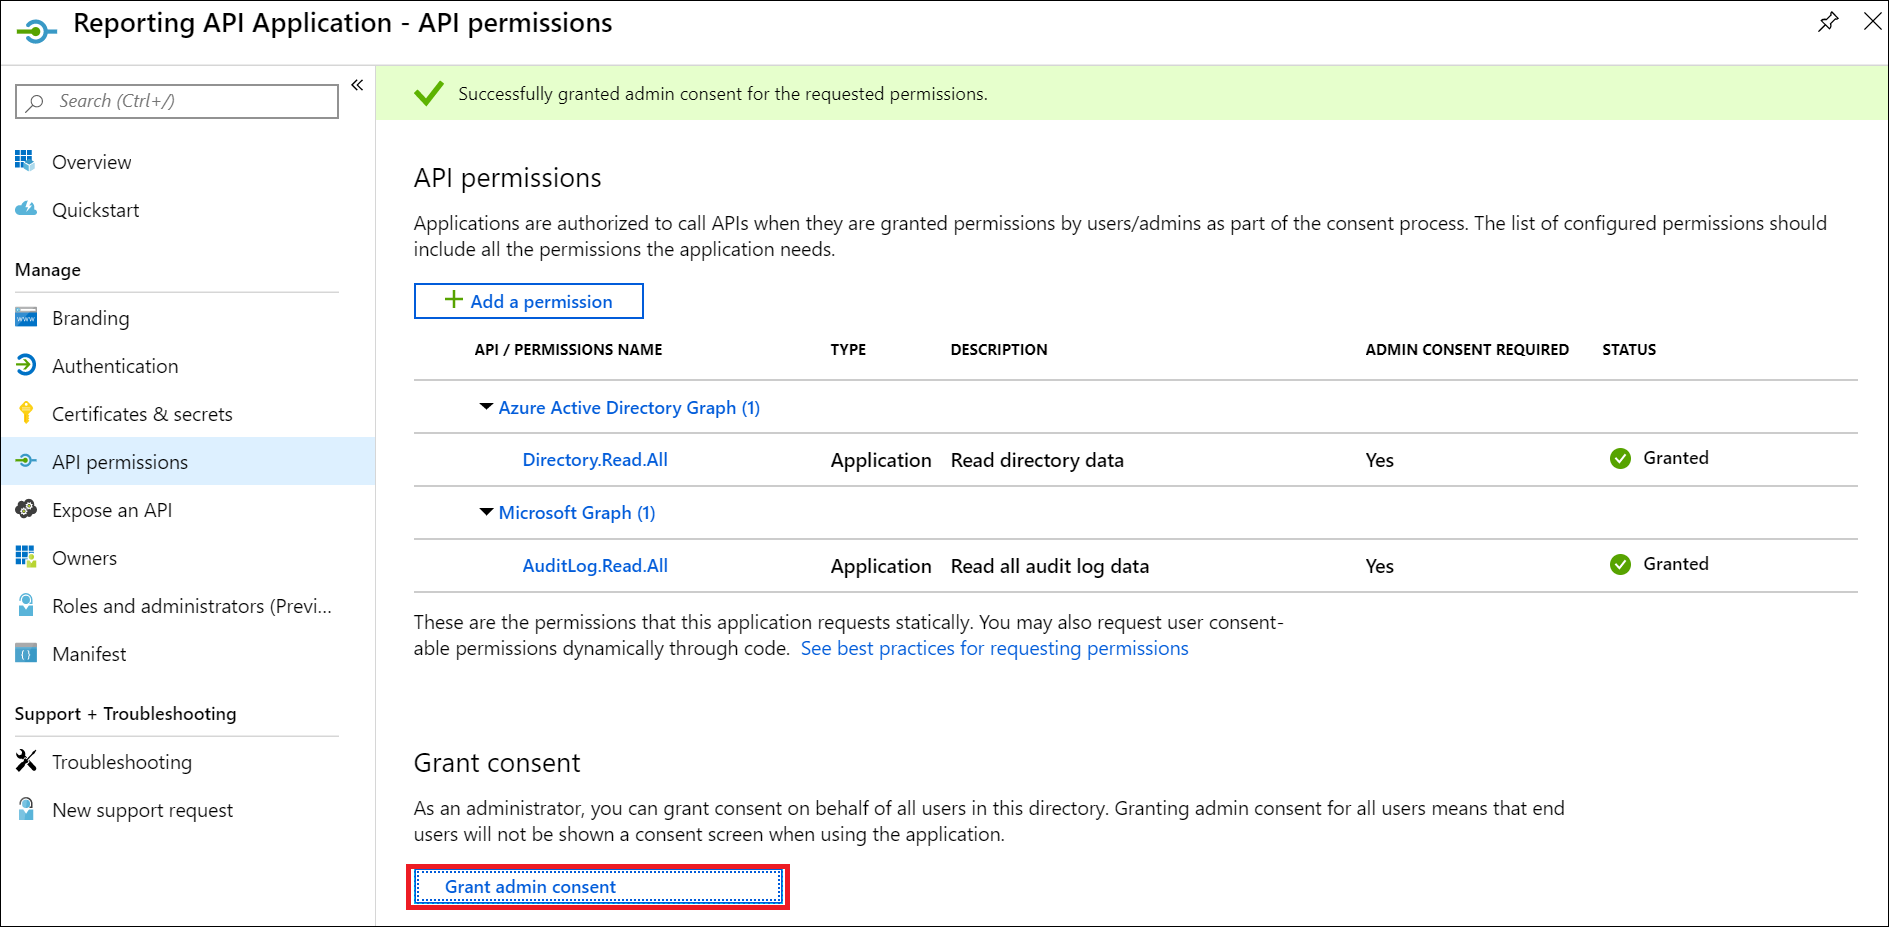 Screenshot shows the Reporting A P I Application A P I permissions page where you can select Grant admin consent.